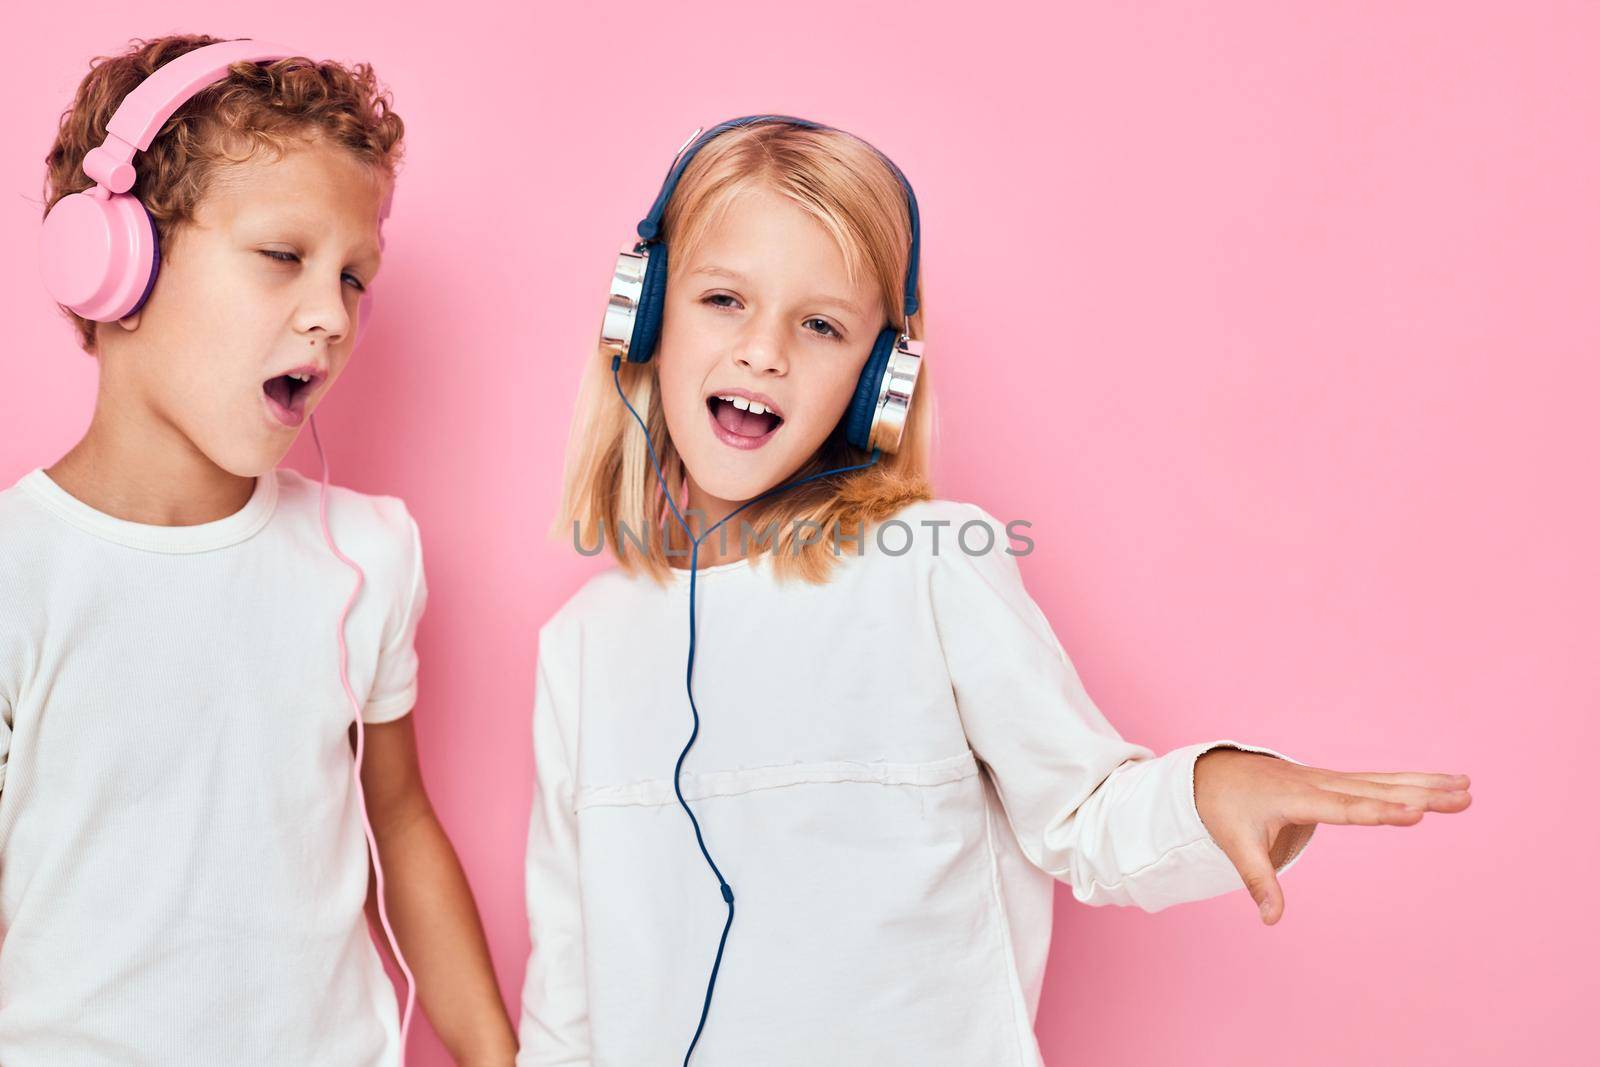 boy and girl stand next to in headphones lifestyle childhood. High quality photo